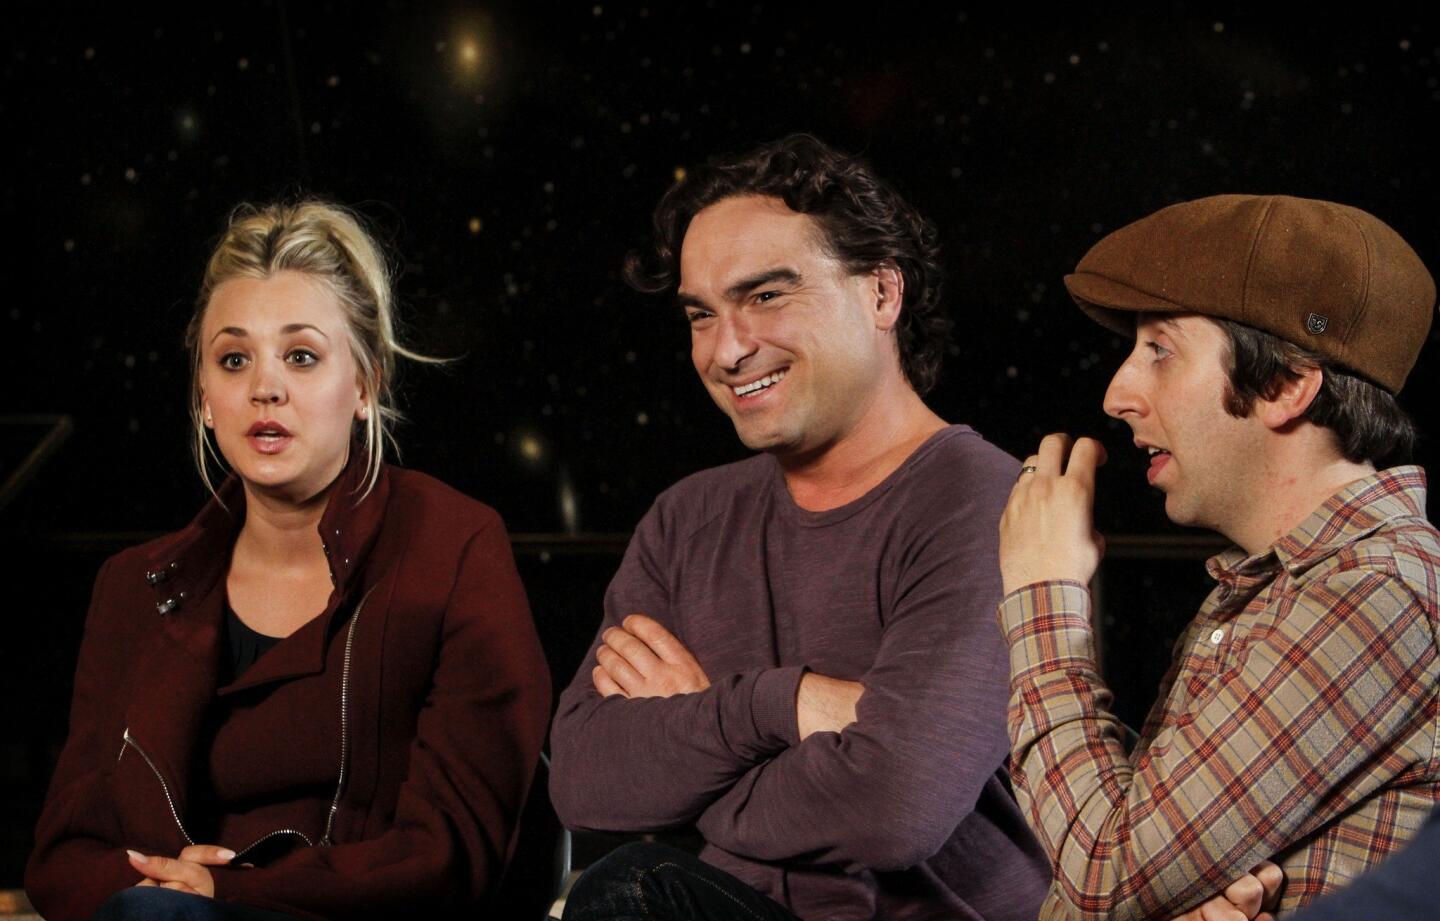 'The Big Bang Theory' at Griffith Observatory